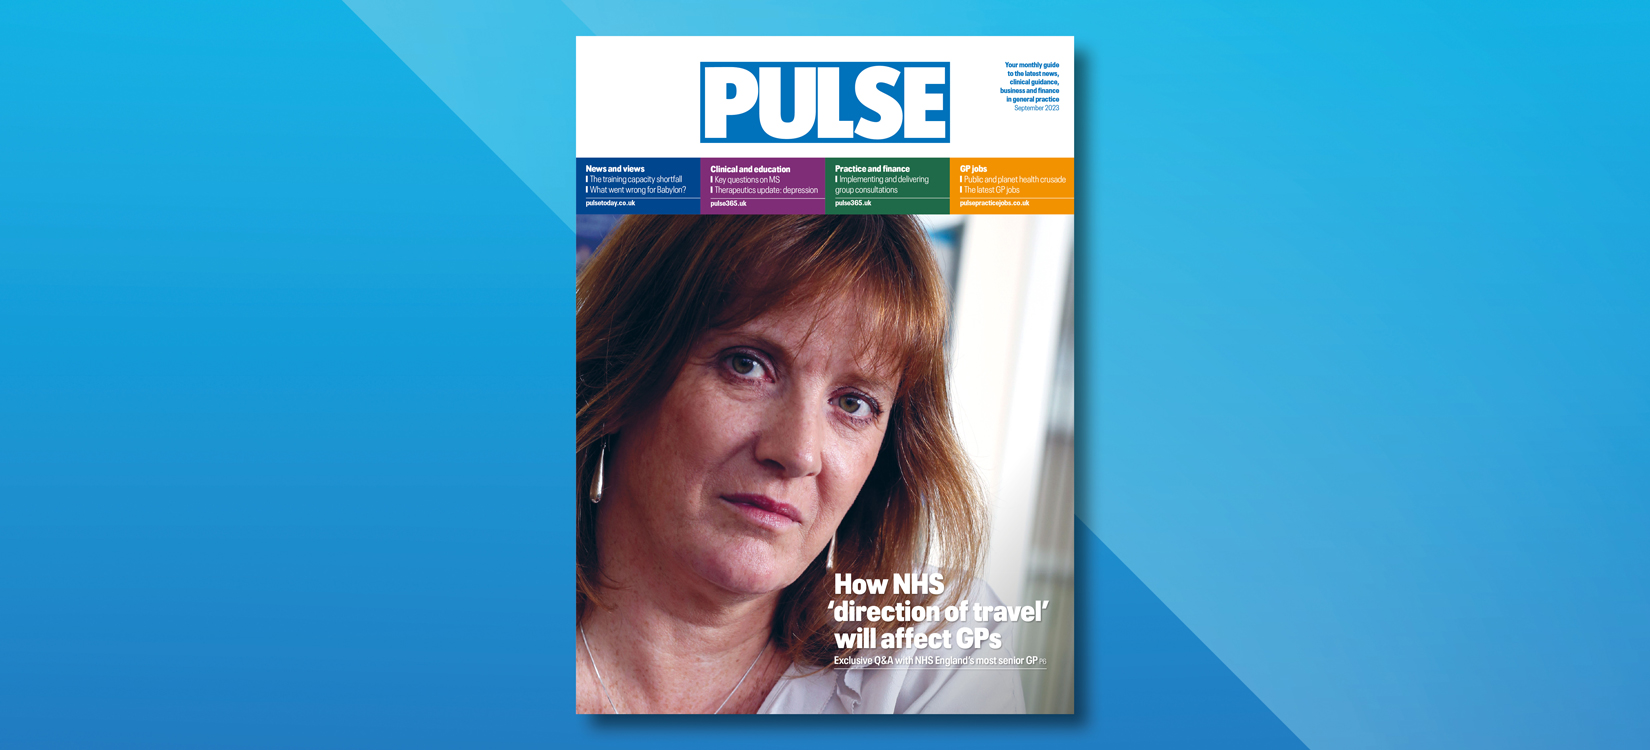 Pulse: How NHS ‘direction of travel’ will affect GPs